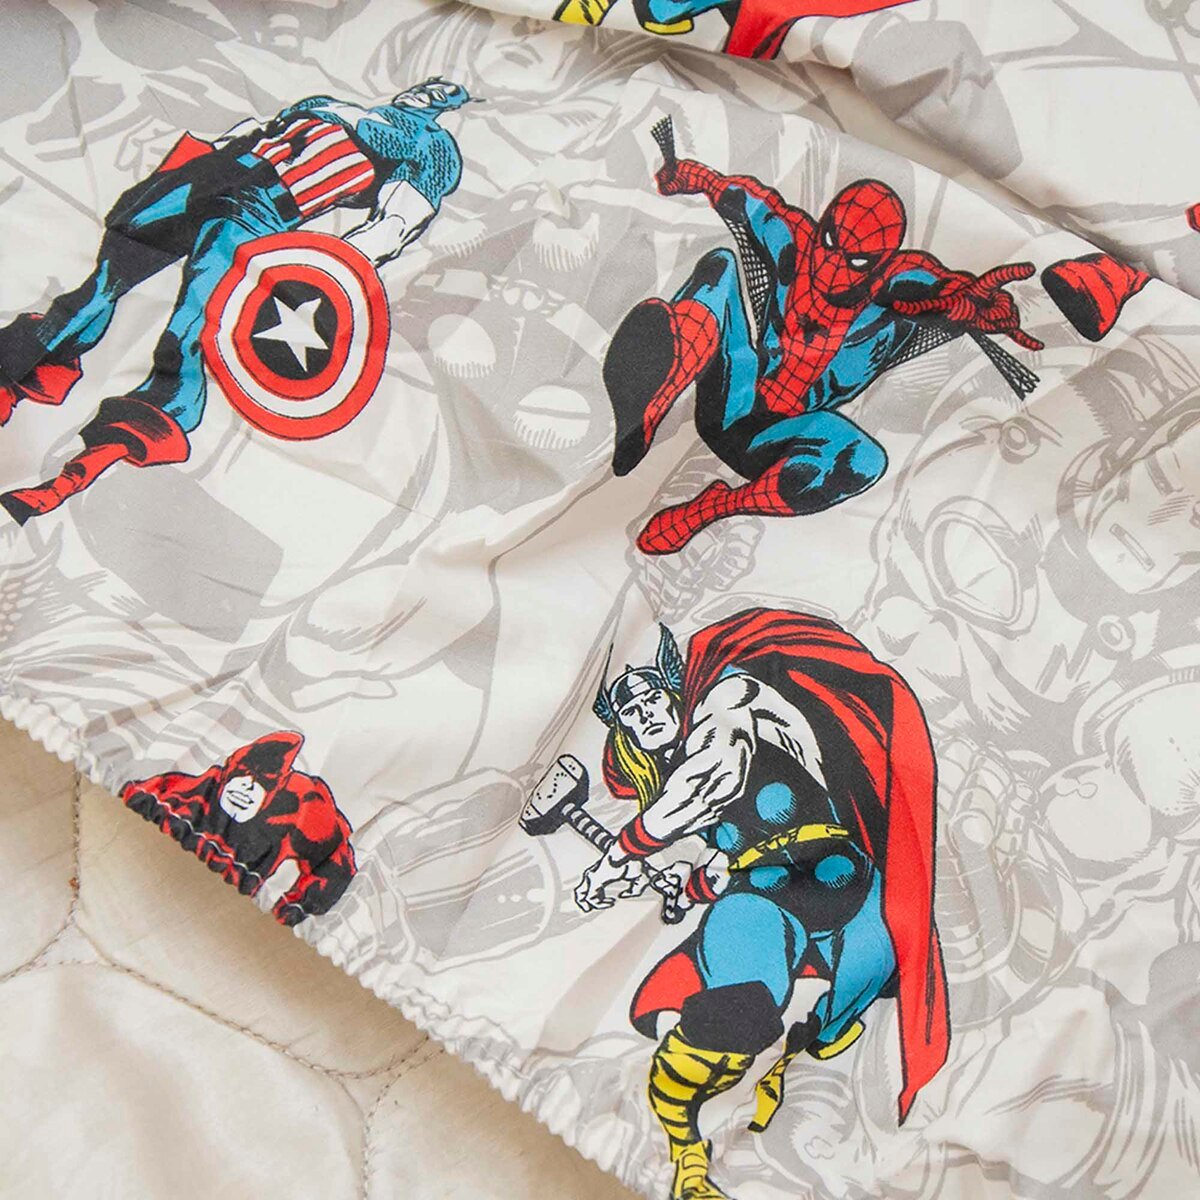 Marvel Avengers Fitted Bed Sheet for Kids -Super Soft, Fade Resistant (Official Marvel Product) 90x190+25cm RHA11982